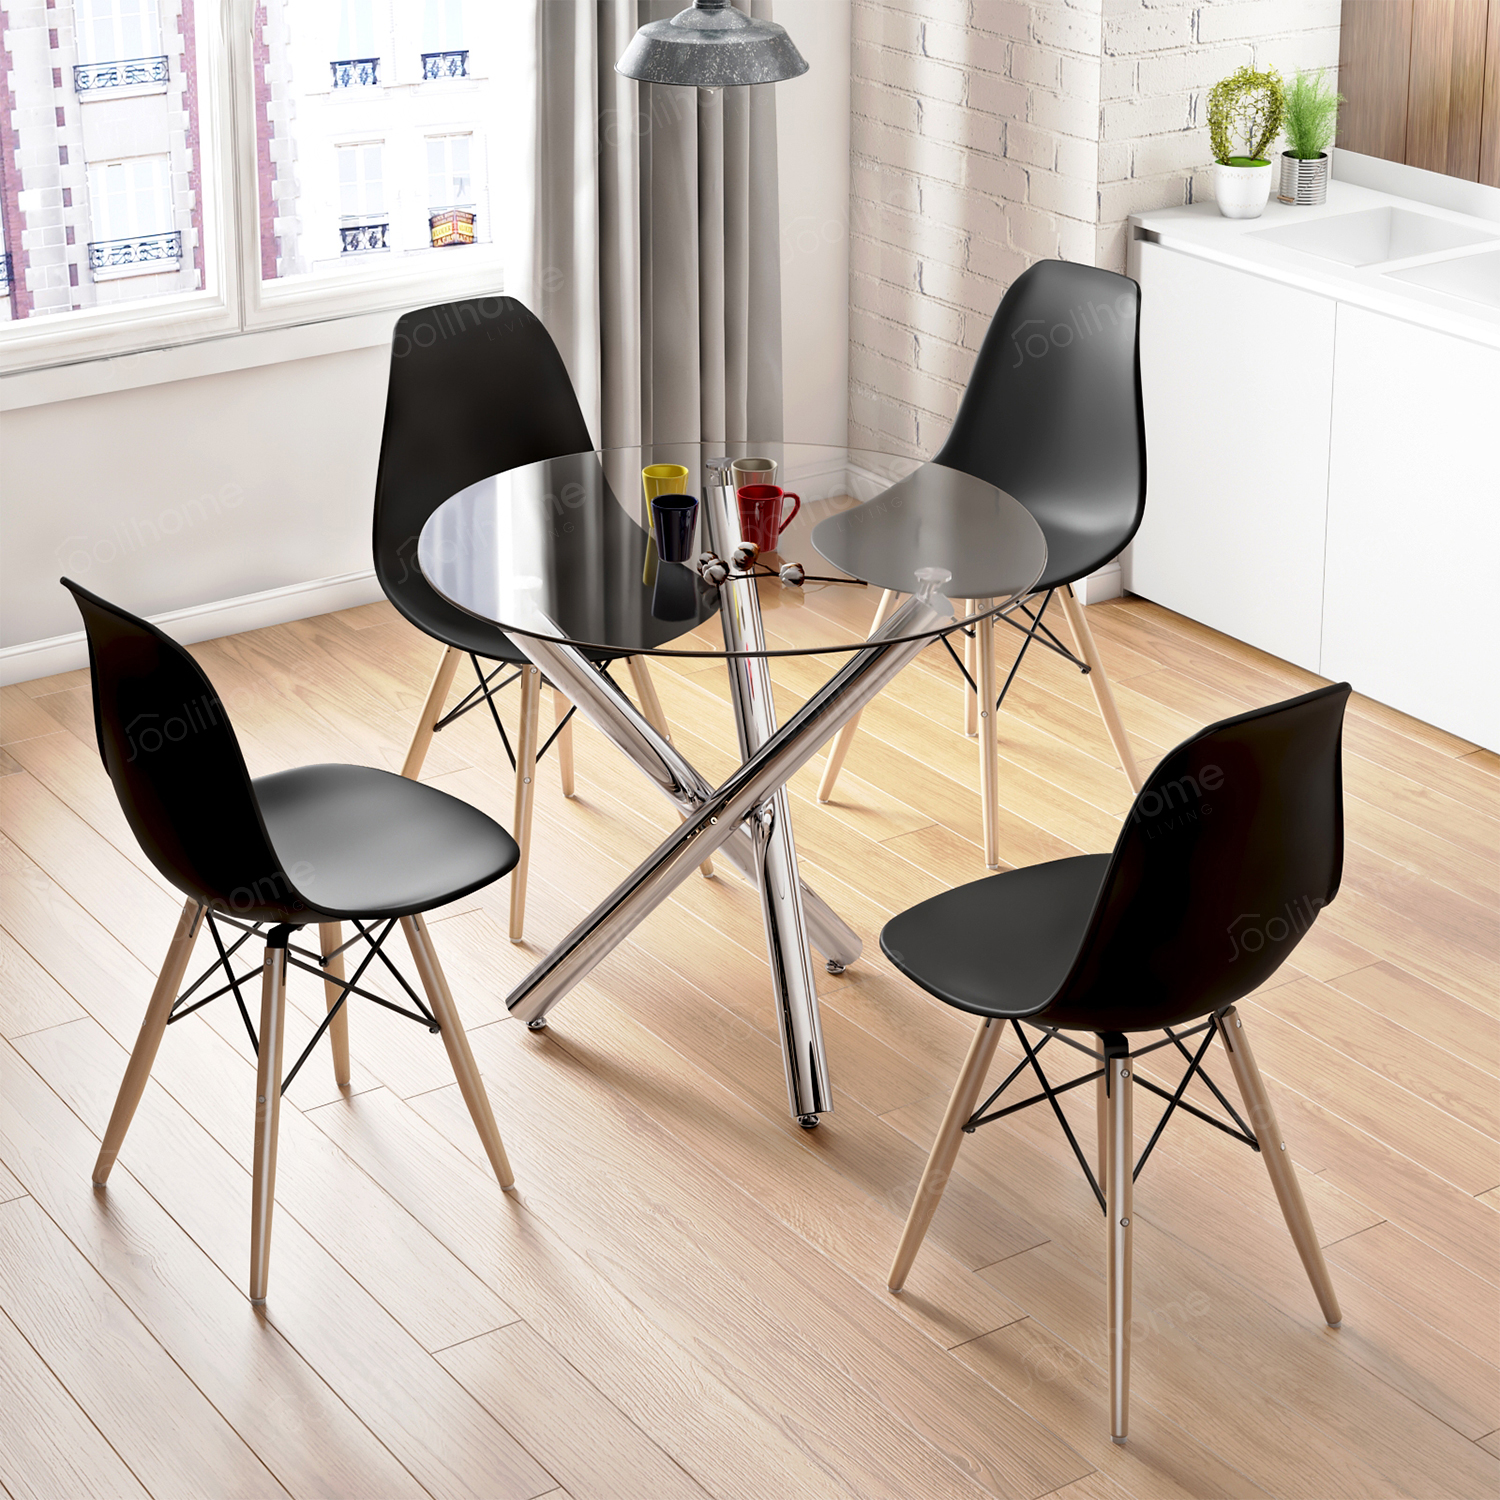 details about set of glass round table  4 chairs dining table set kitchen  living room cafe uk